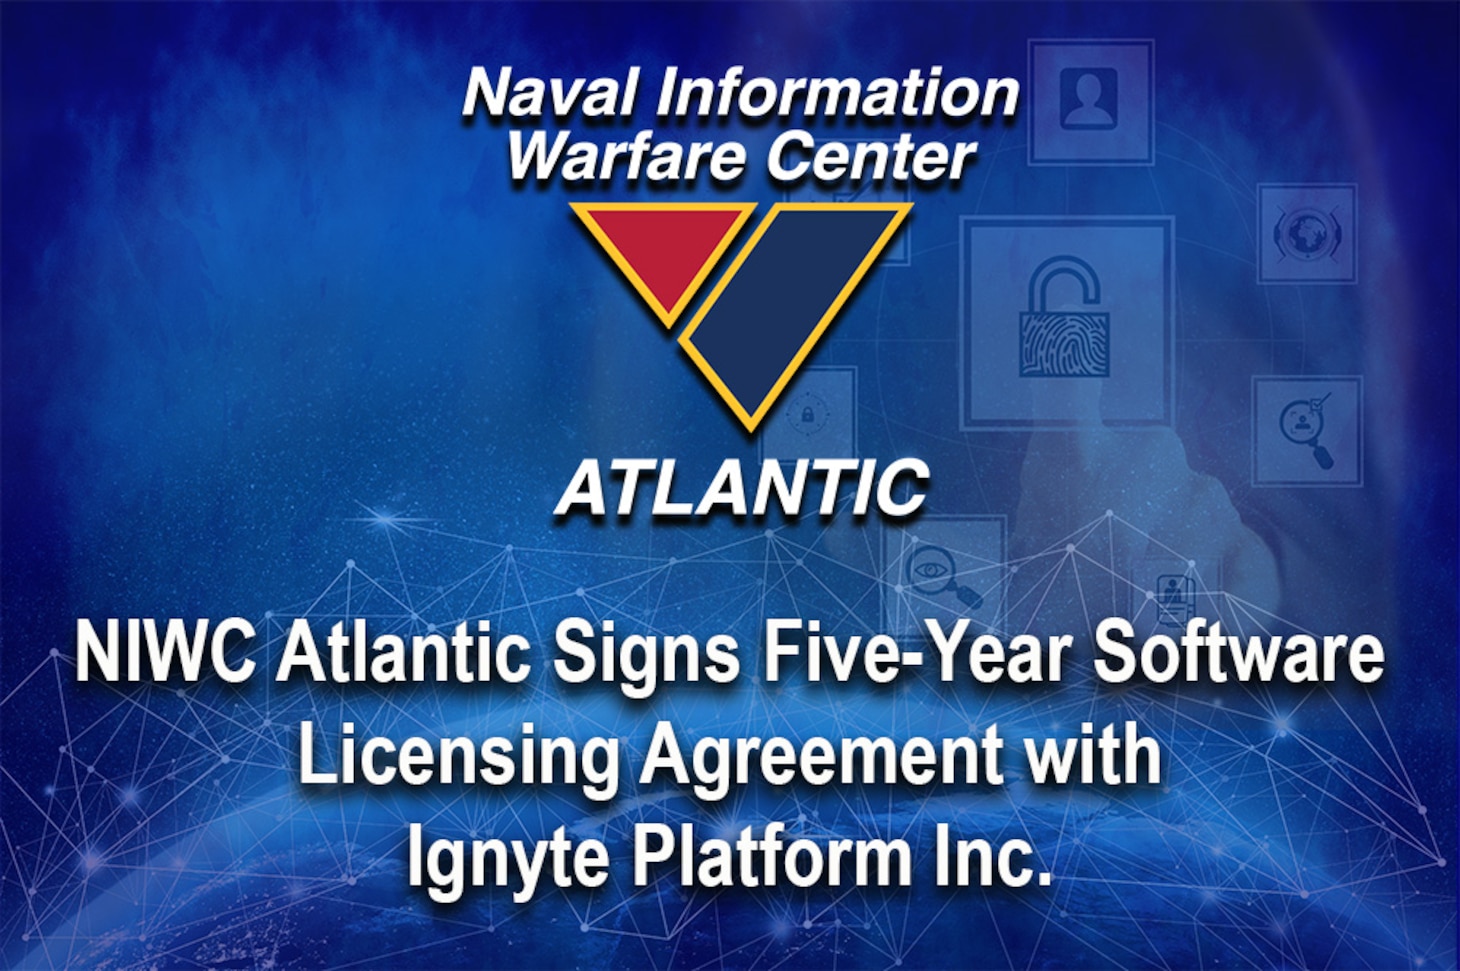 Naval Information Warfare Center Atlantic Signs Five-Year Software Licensing Agreement with Ignyte Platform Inc.